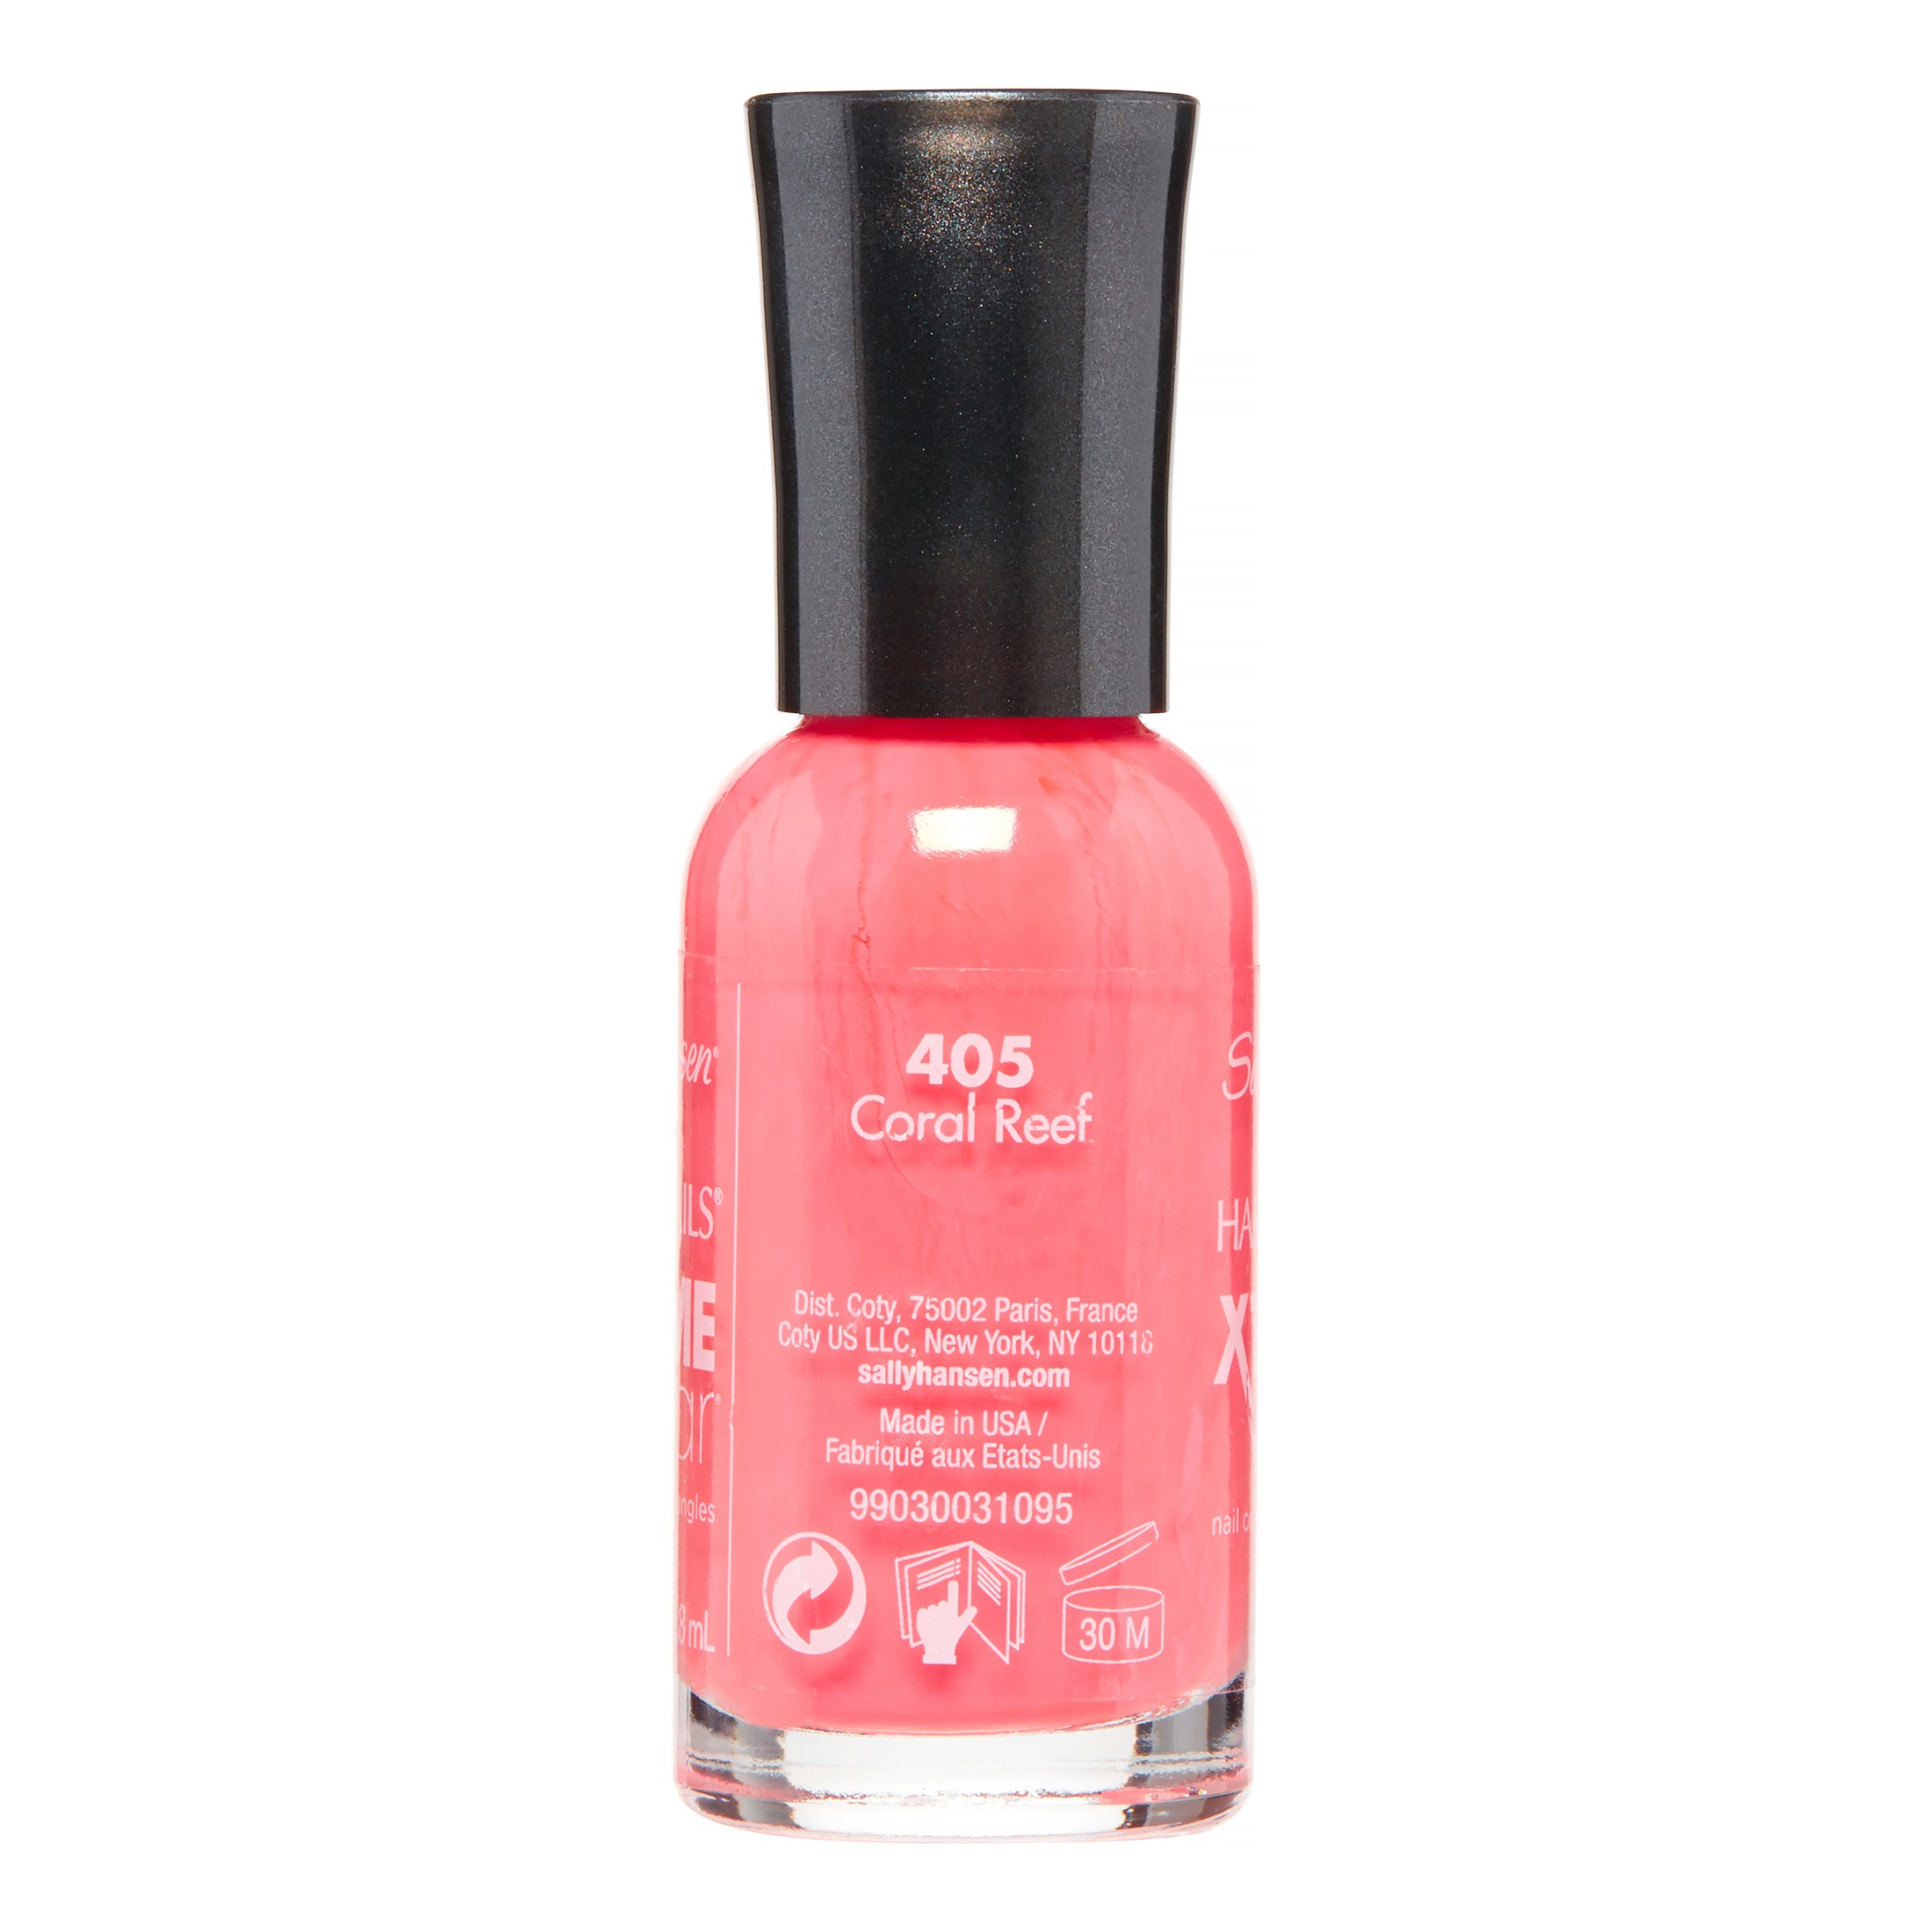 Sally Hansen Complete Salon Manicure Nail Polish, Arm Candy - image 2 of 3